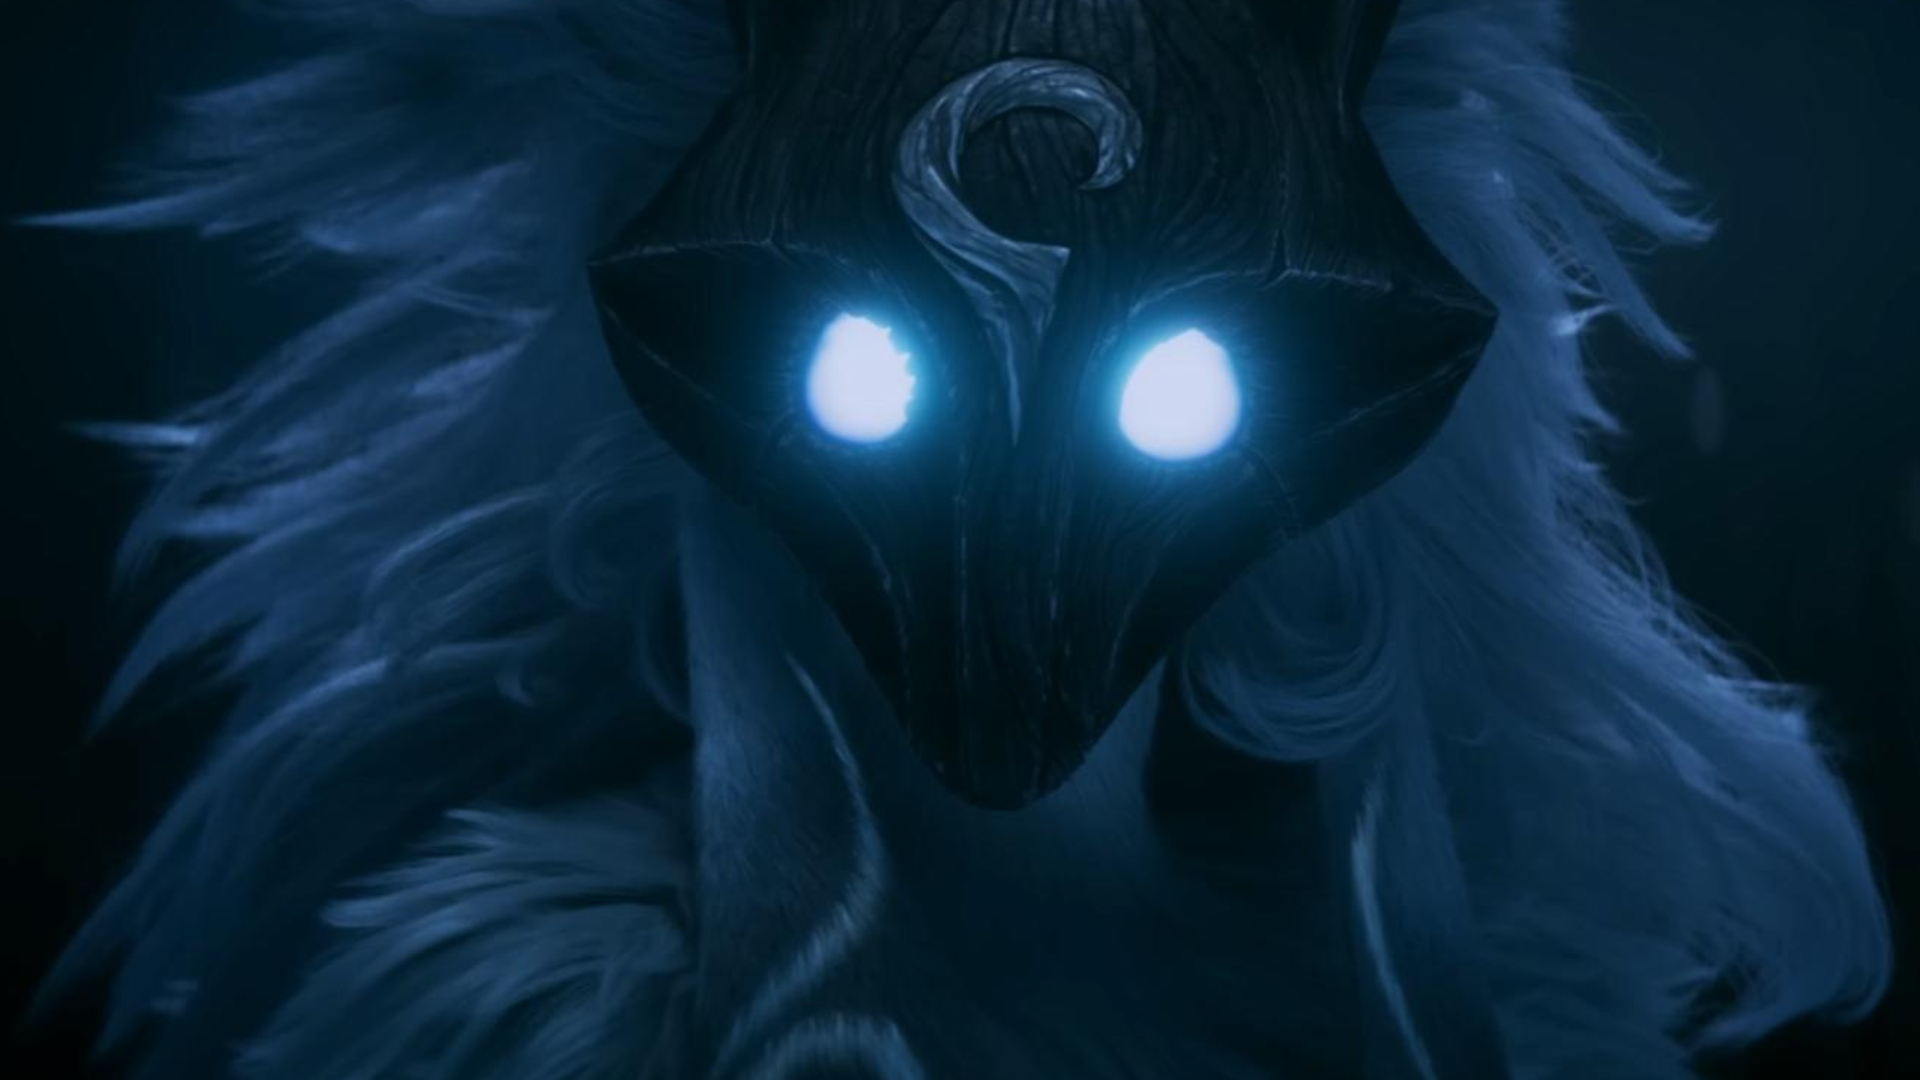 The haunting visage of Lamb, one half of Kindred. She is an ethereal creature wearing a carved mask, with bright blue eyes glowing.